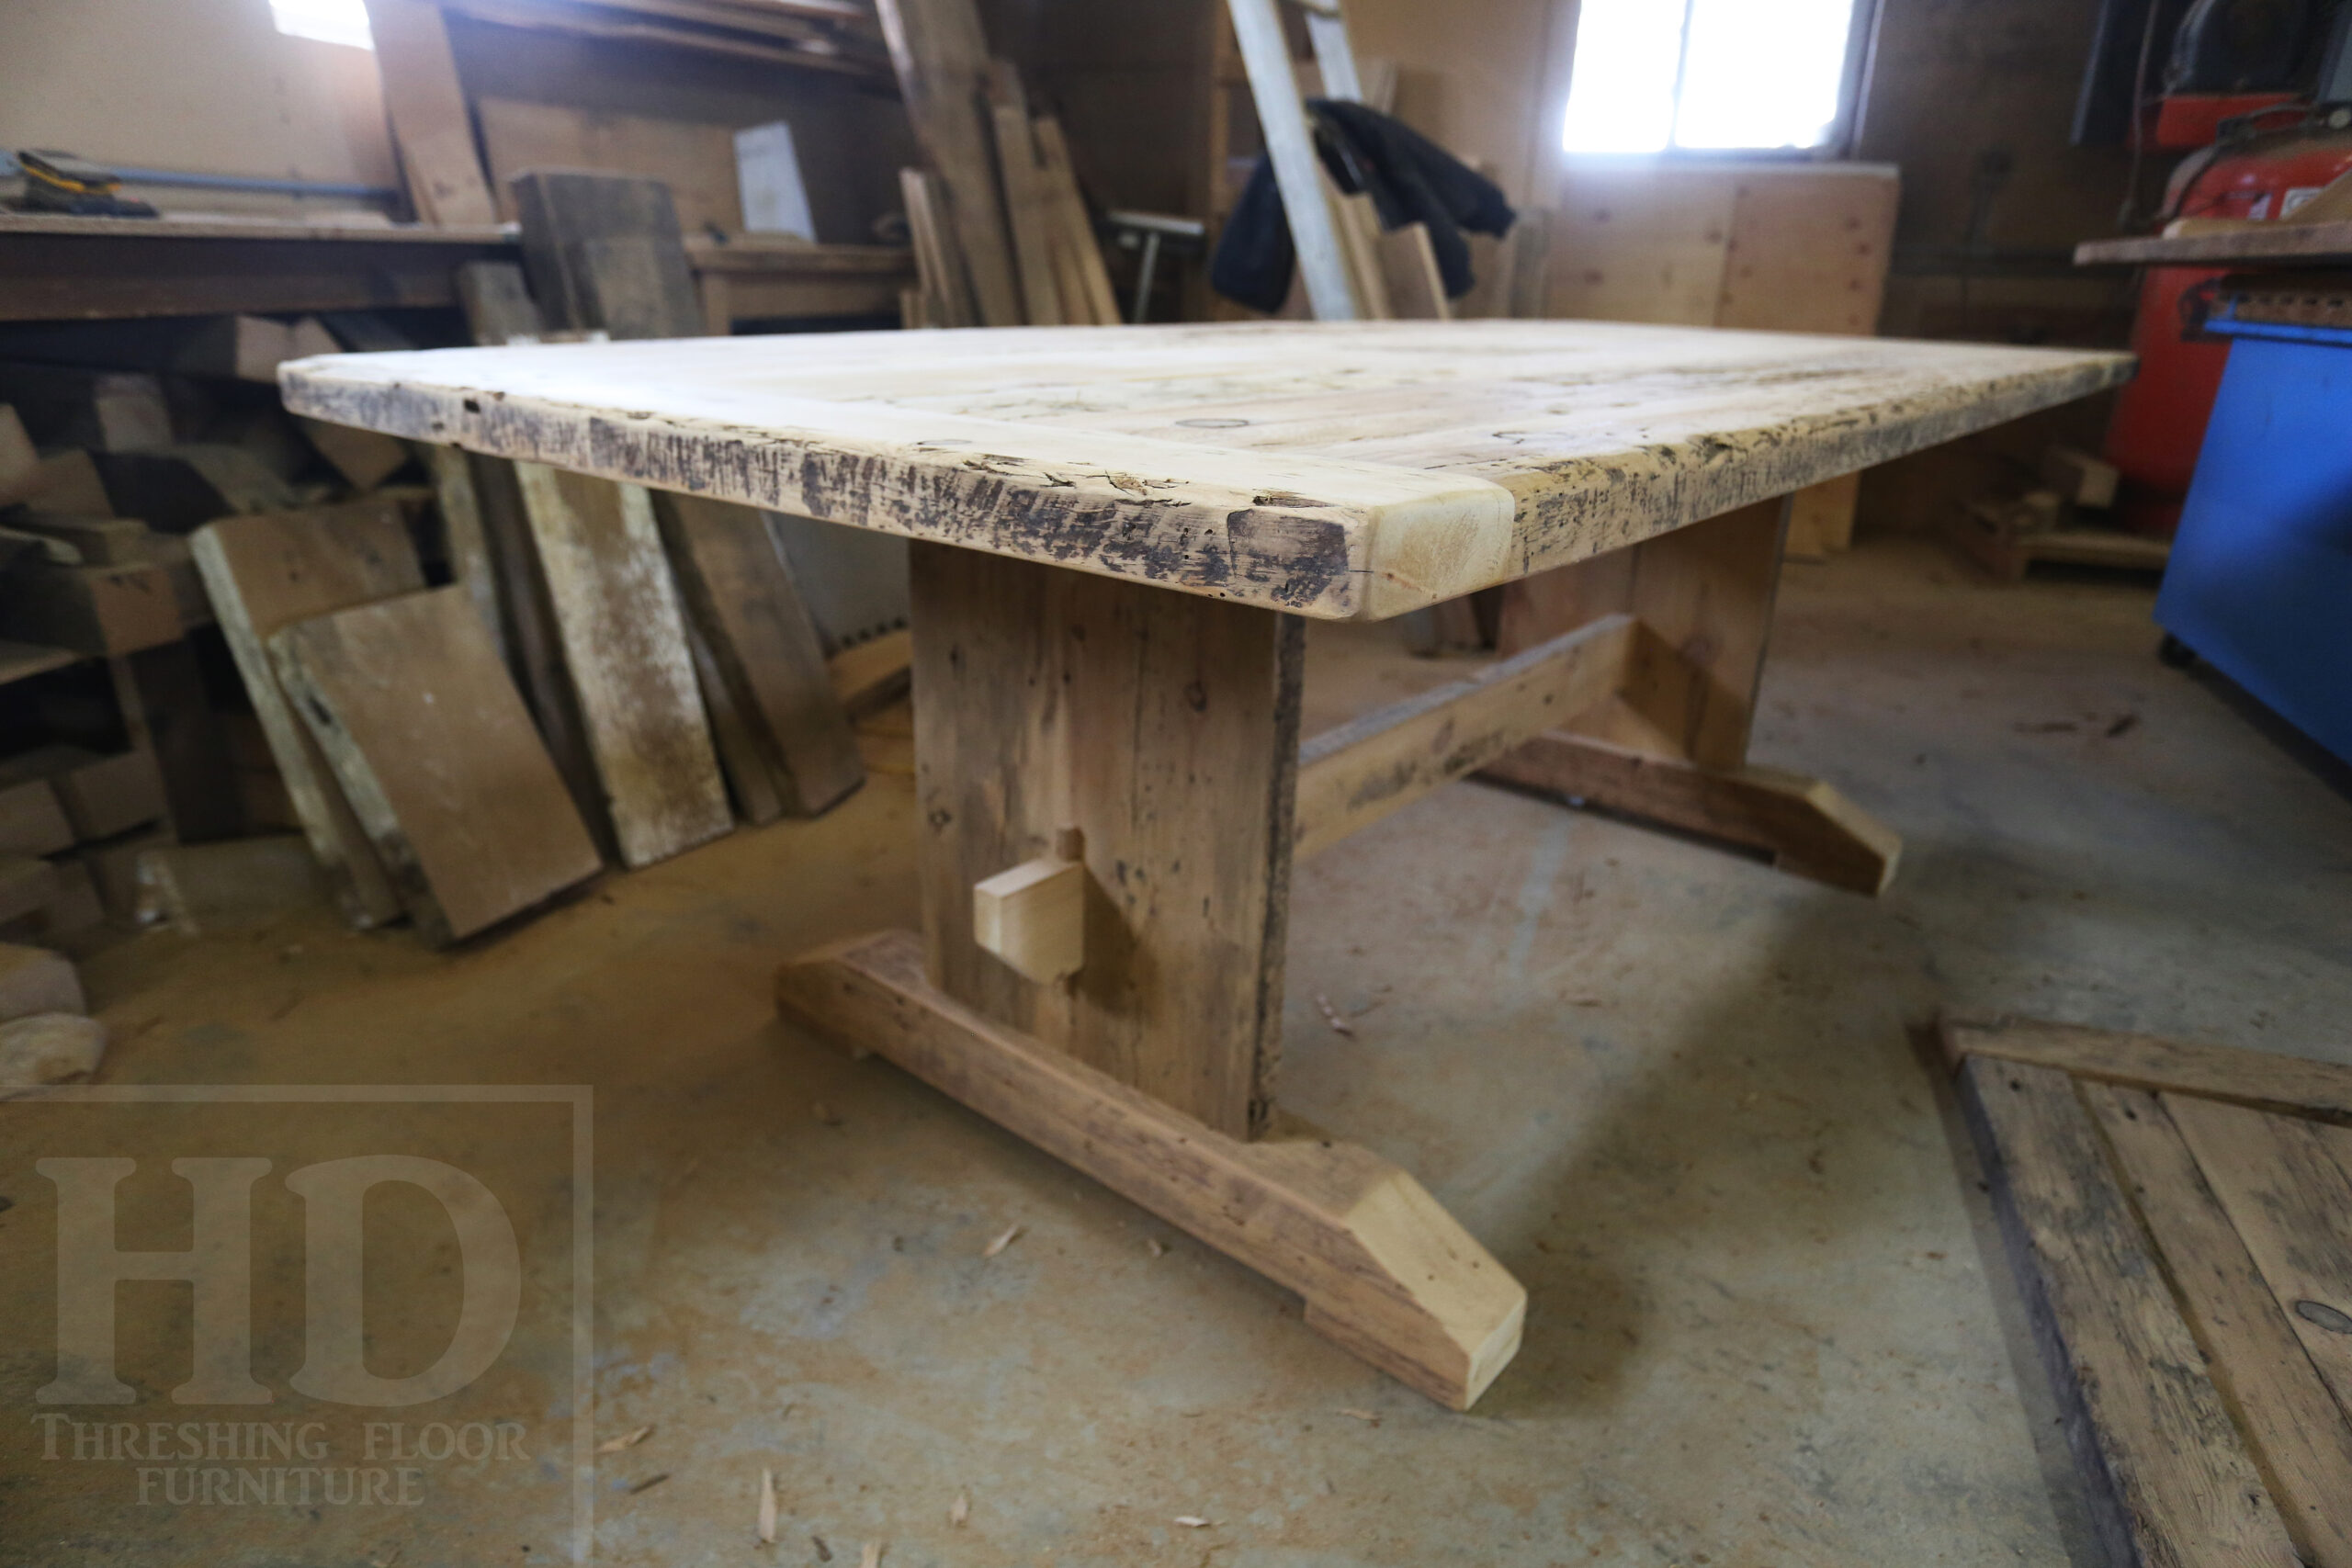 7' Ontario Barnwood Table for a Grassie, Ontario Home - 42" wide - Trestle Base - Reclaimed Old Growth Pine Threshing Floor Construction - Original Distressing & Character & Edges Maintained - Premium epoxy + satin polyurethane finish - One 18" Leaf Extension - 7' [matching] Trestle Bench - 5 Wormy Maple Chairs - Stained to match table - www.table.ca